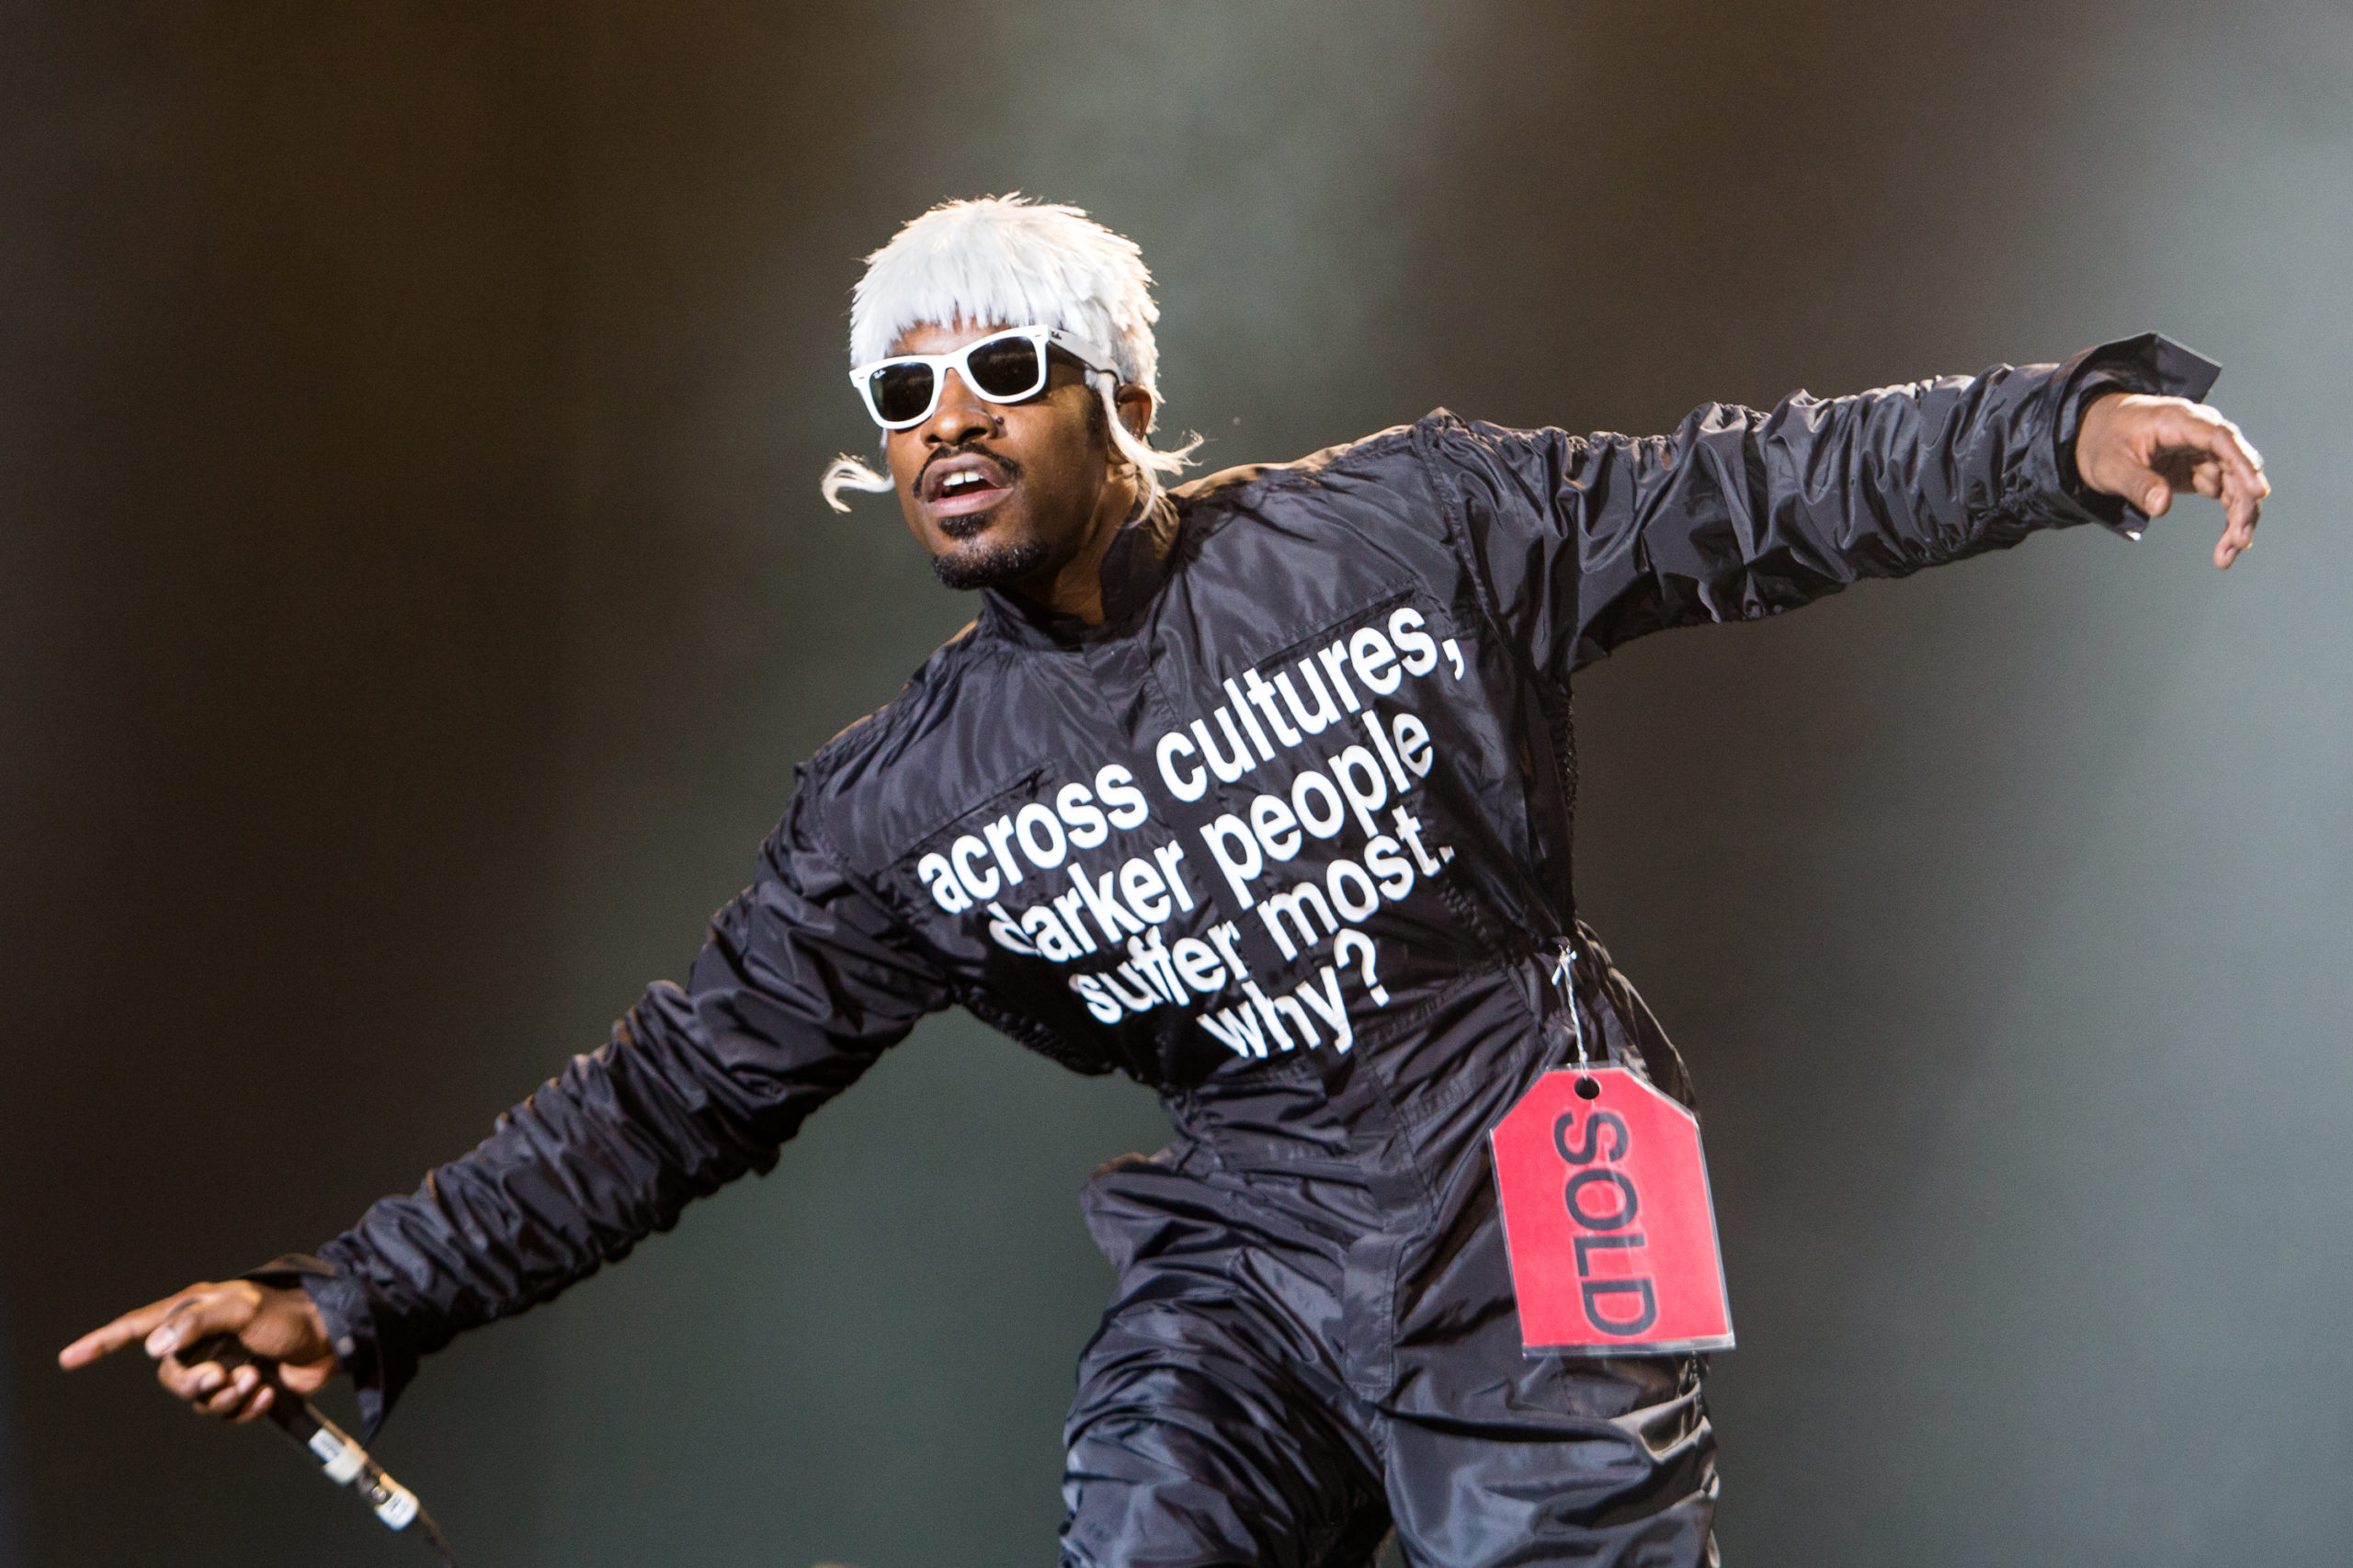 Shop Andre 3000’s Collection Of Shirts Inspired By His 2014 Jumpsuits